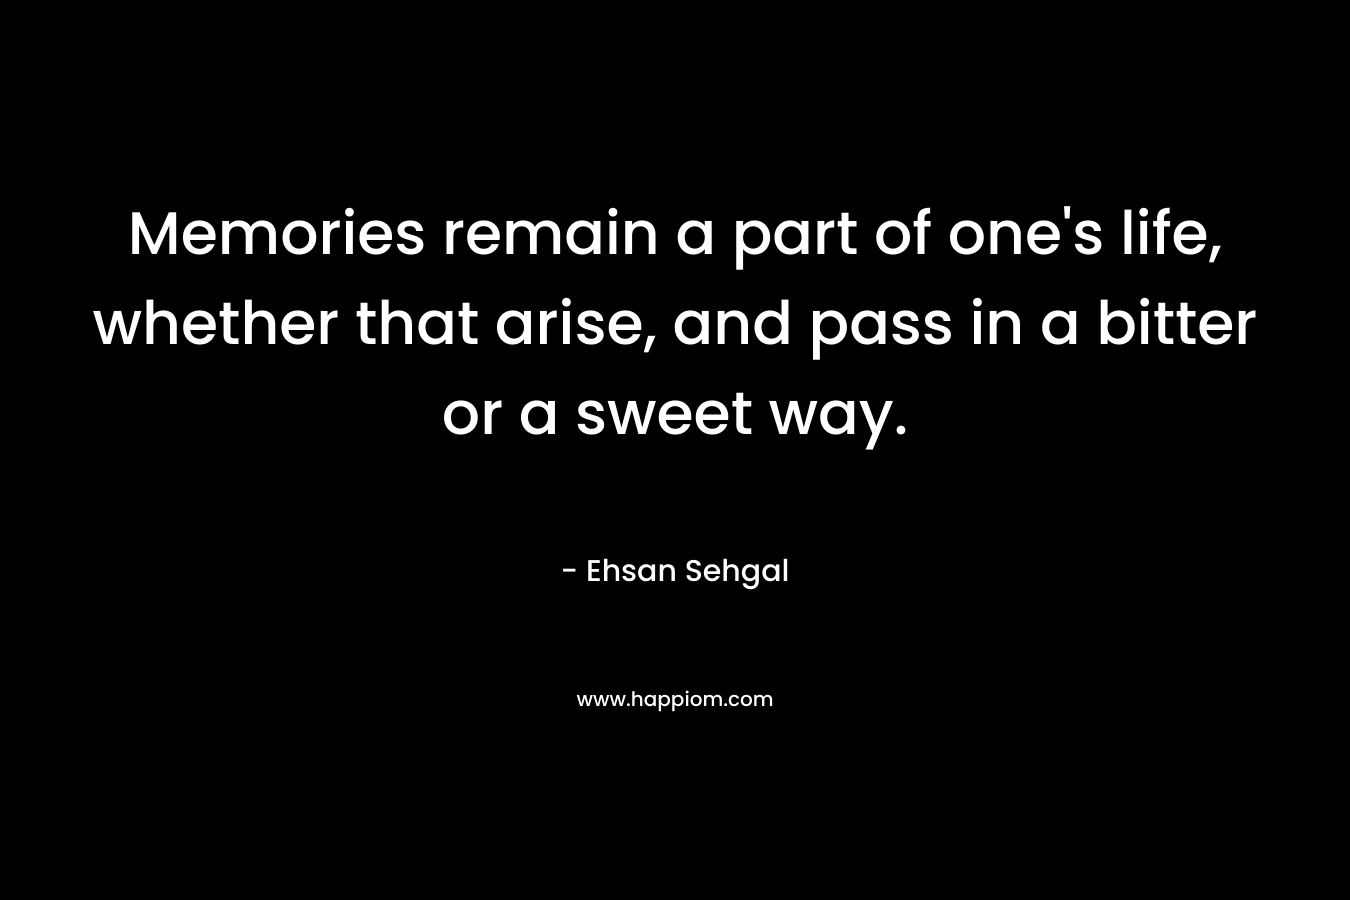 Memories remain a part of one's life, whether that arise, and pass in a bitter or a sweet way.